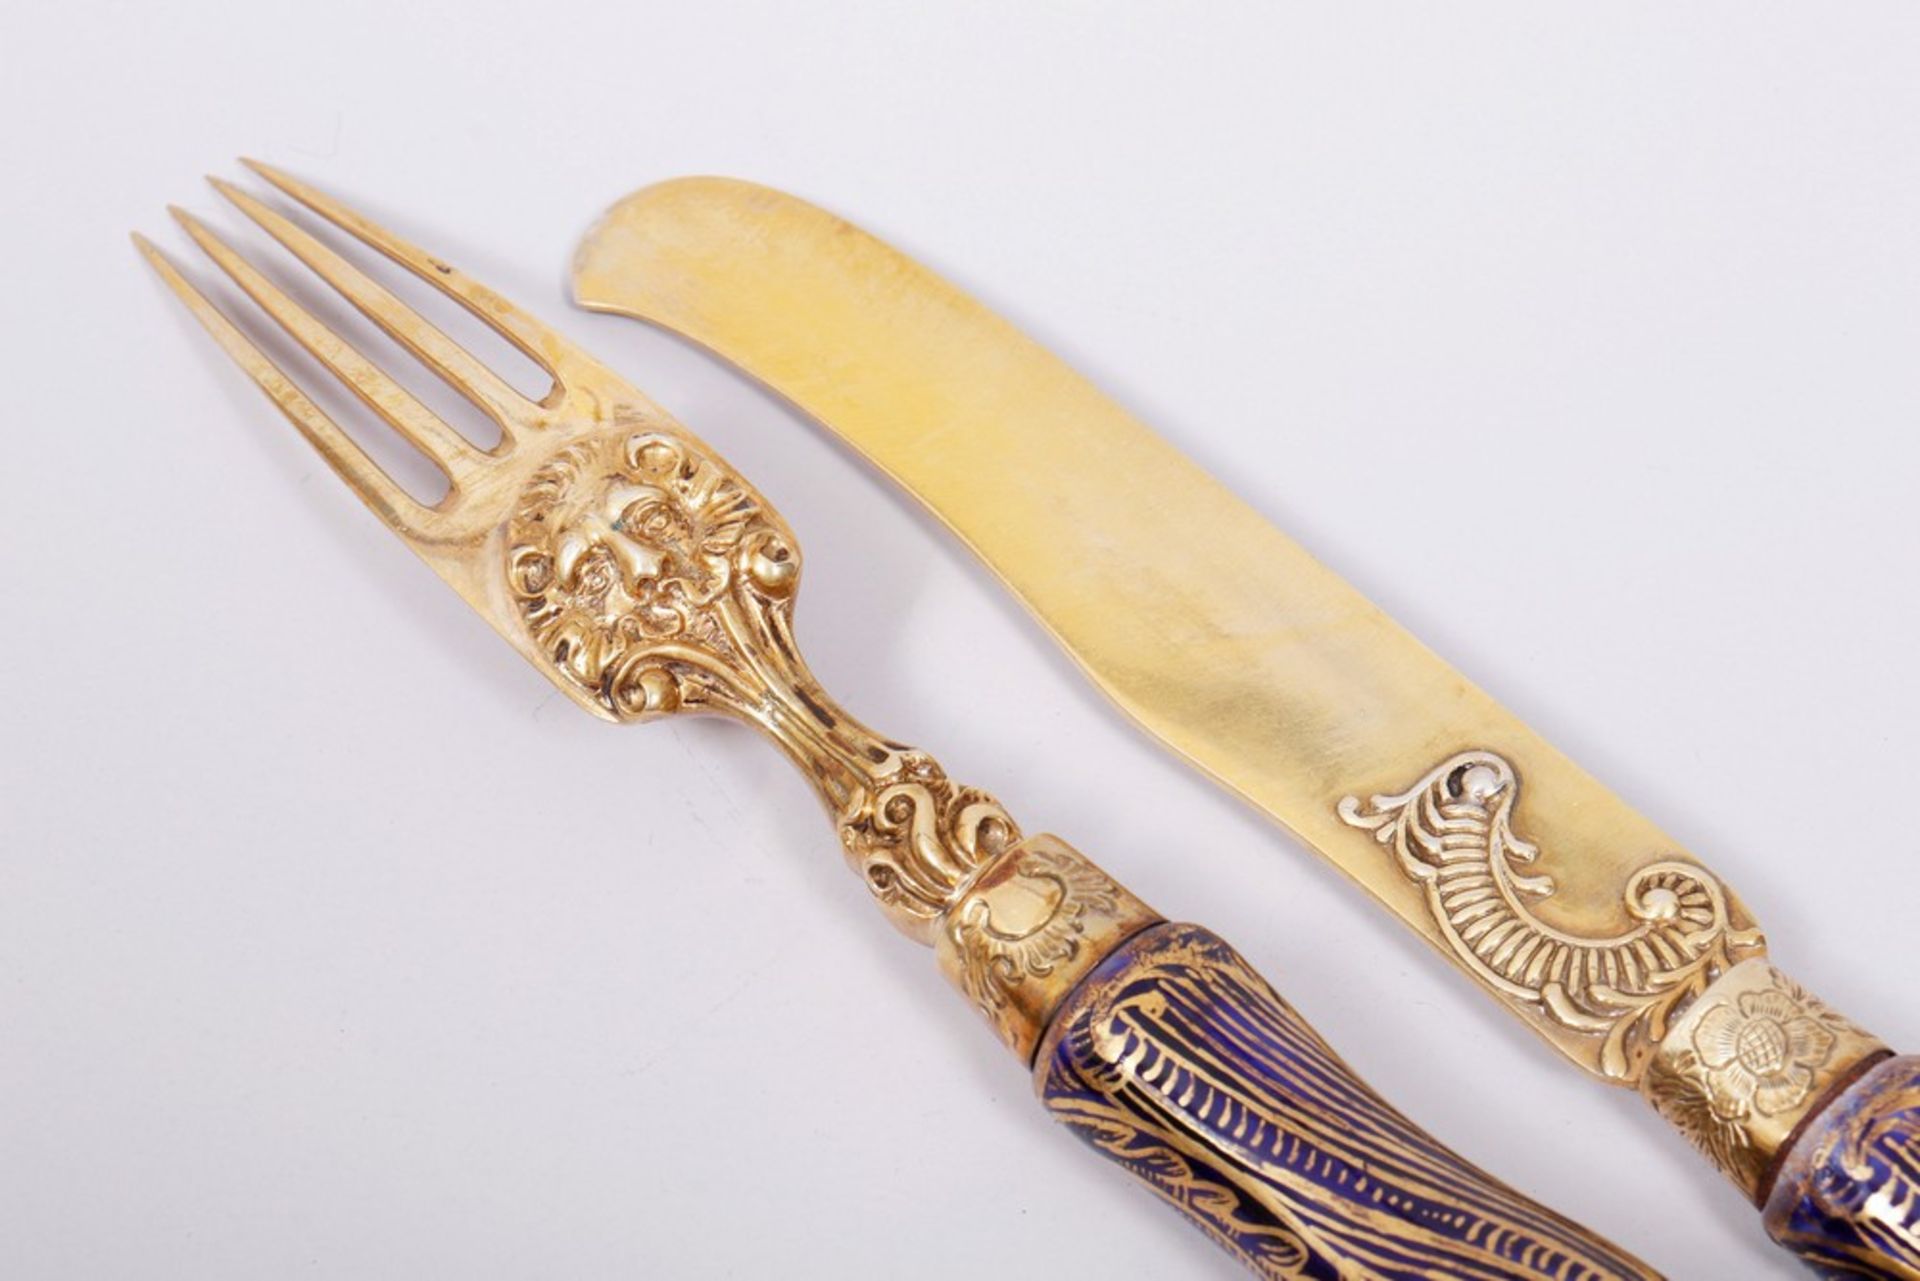 Late Baroque dining knife and fork, silver/gilt, probably German, mid-18th C. - Image 5 of 5